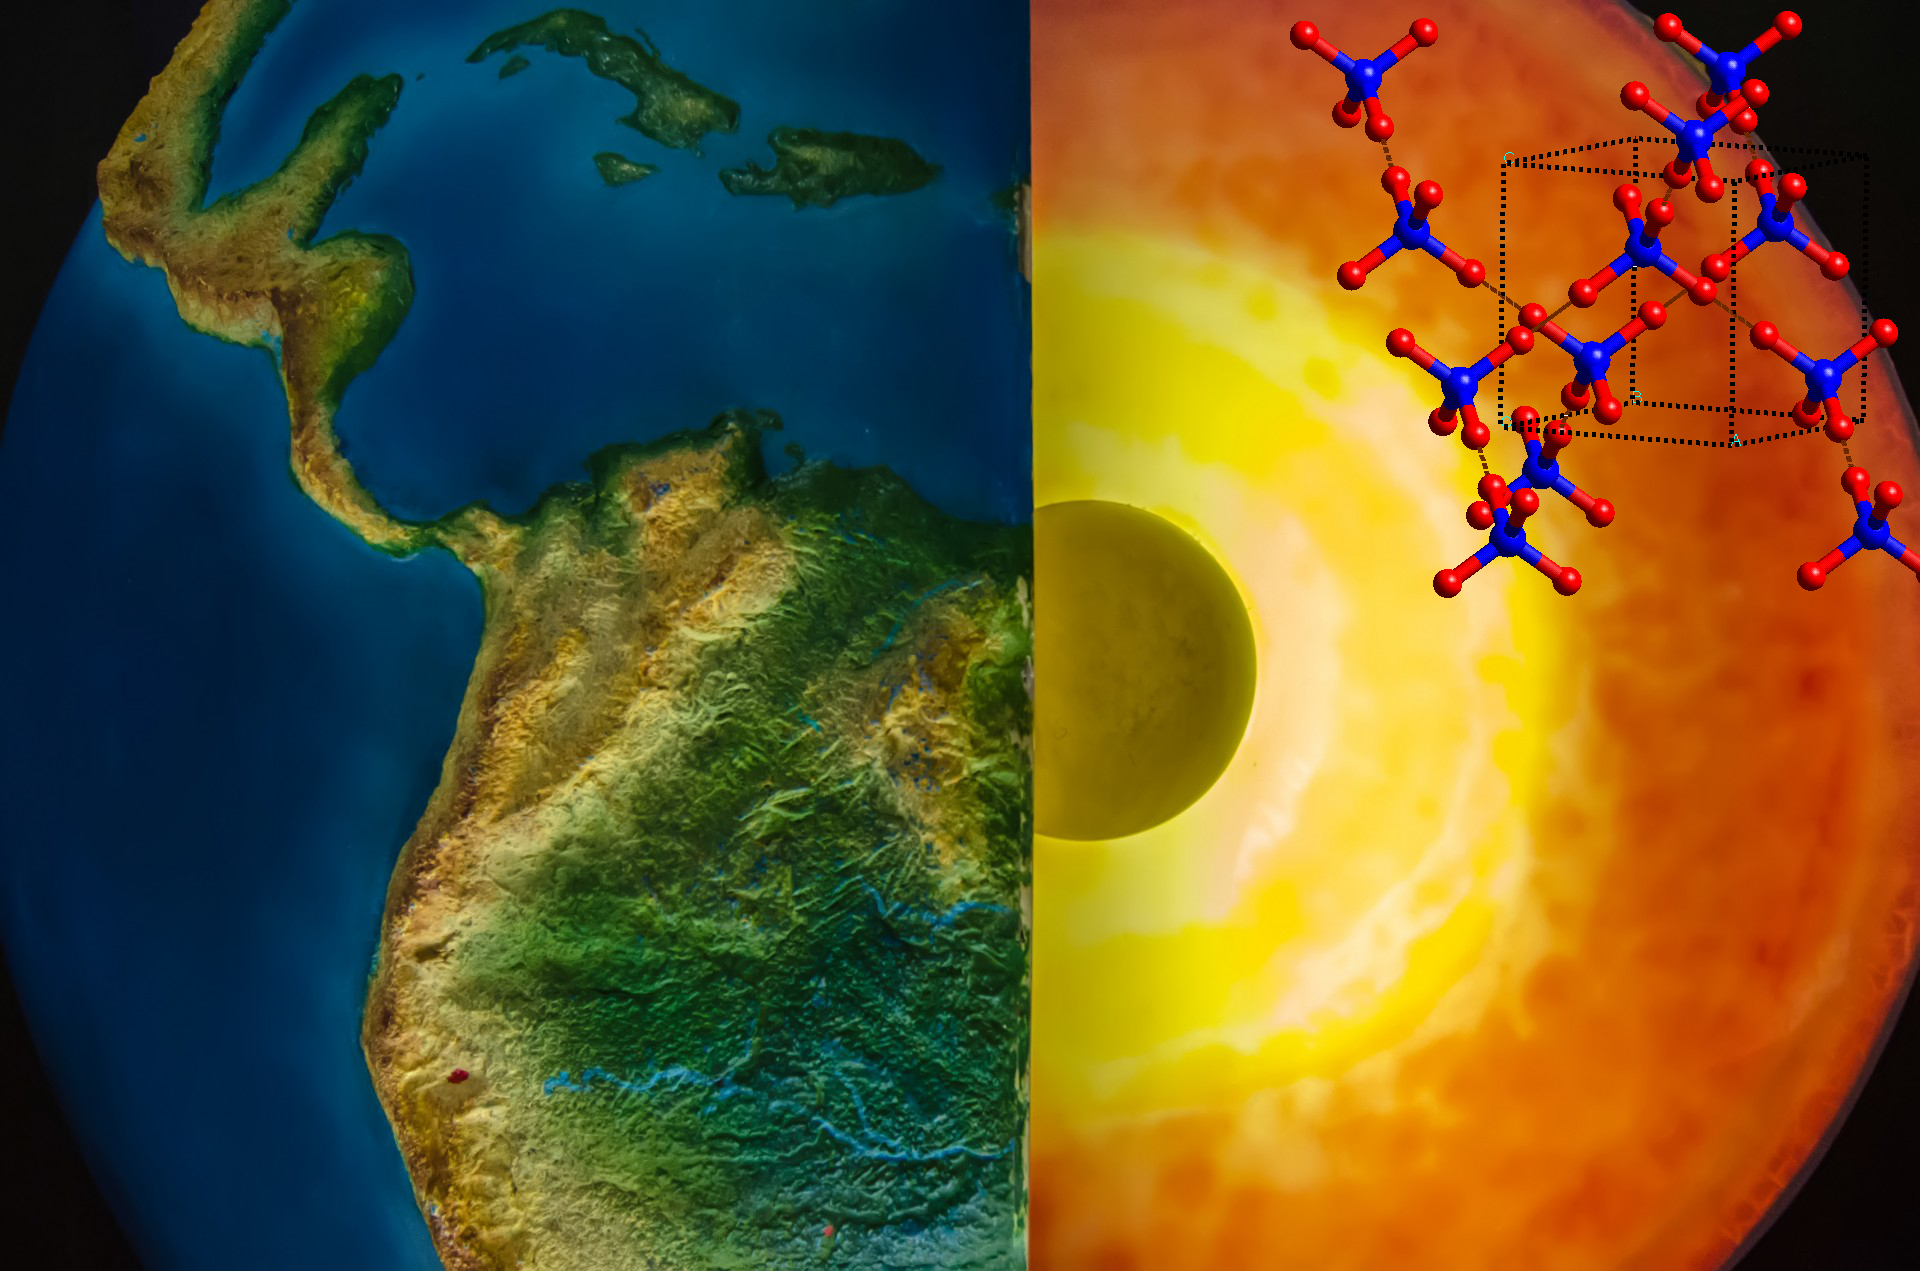 Image - The molecular structure of ice-VII (upper right) is shown with an artistic rendering of the Earth and a cutaway view of the inner Earth (right). (Credit: Wikimedia Commons)